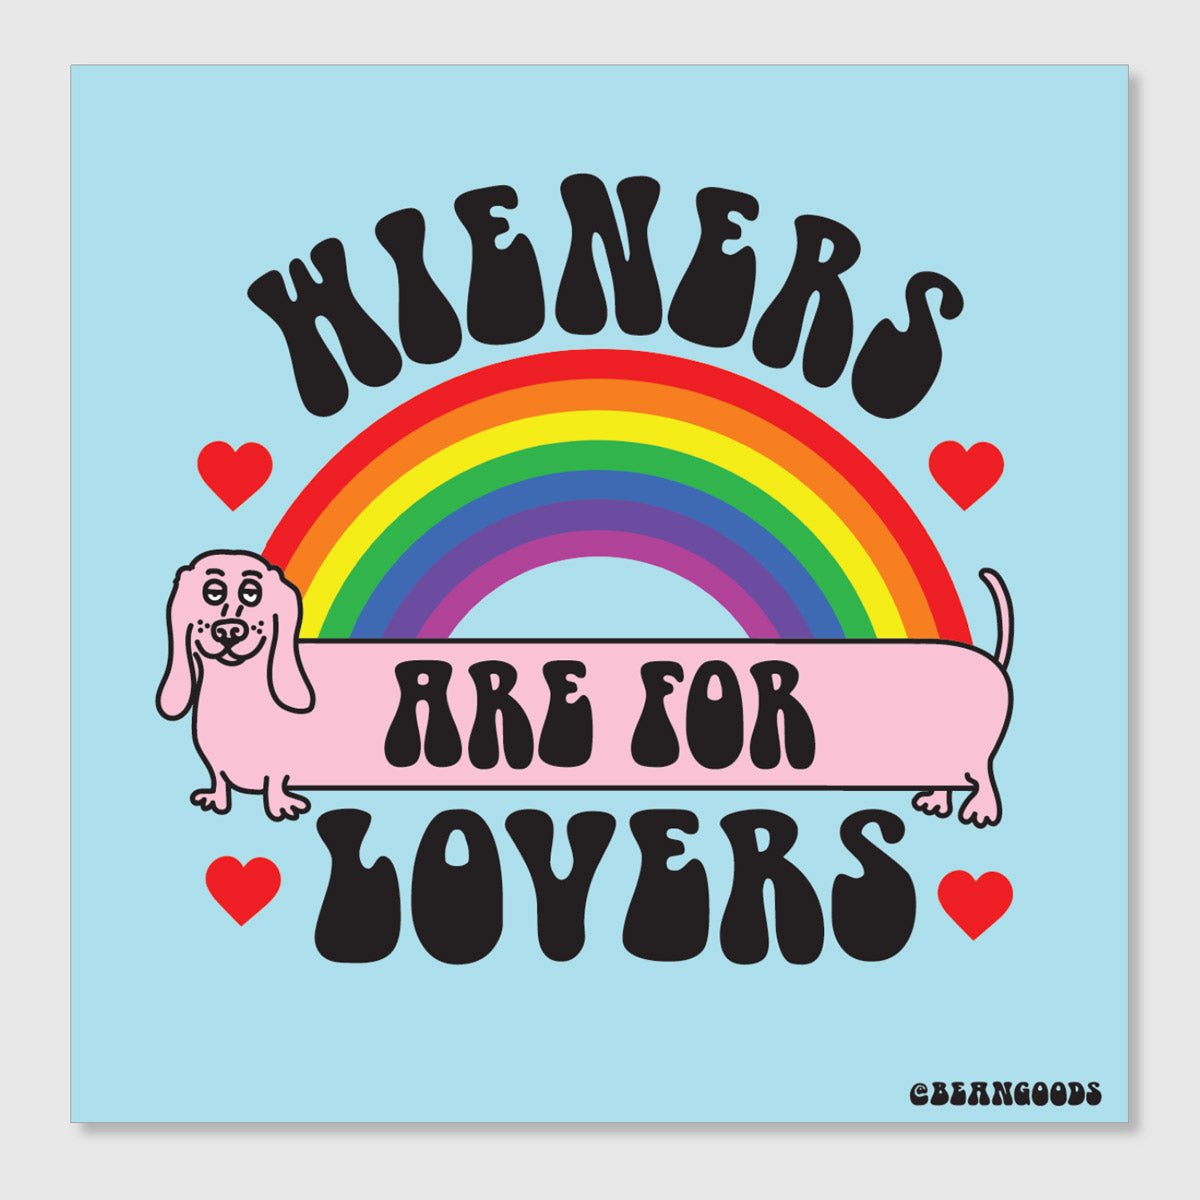 wieners are for lovers sticker - bean goods